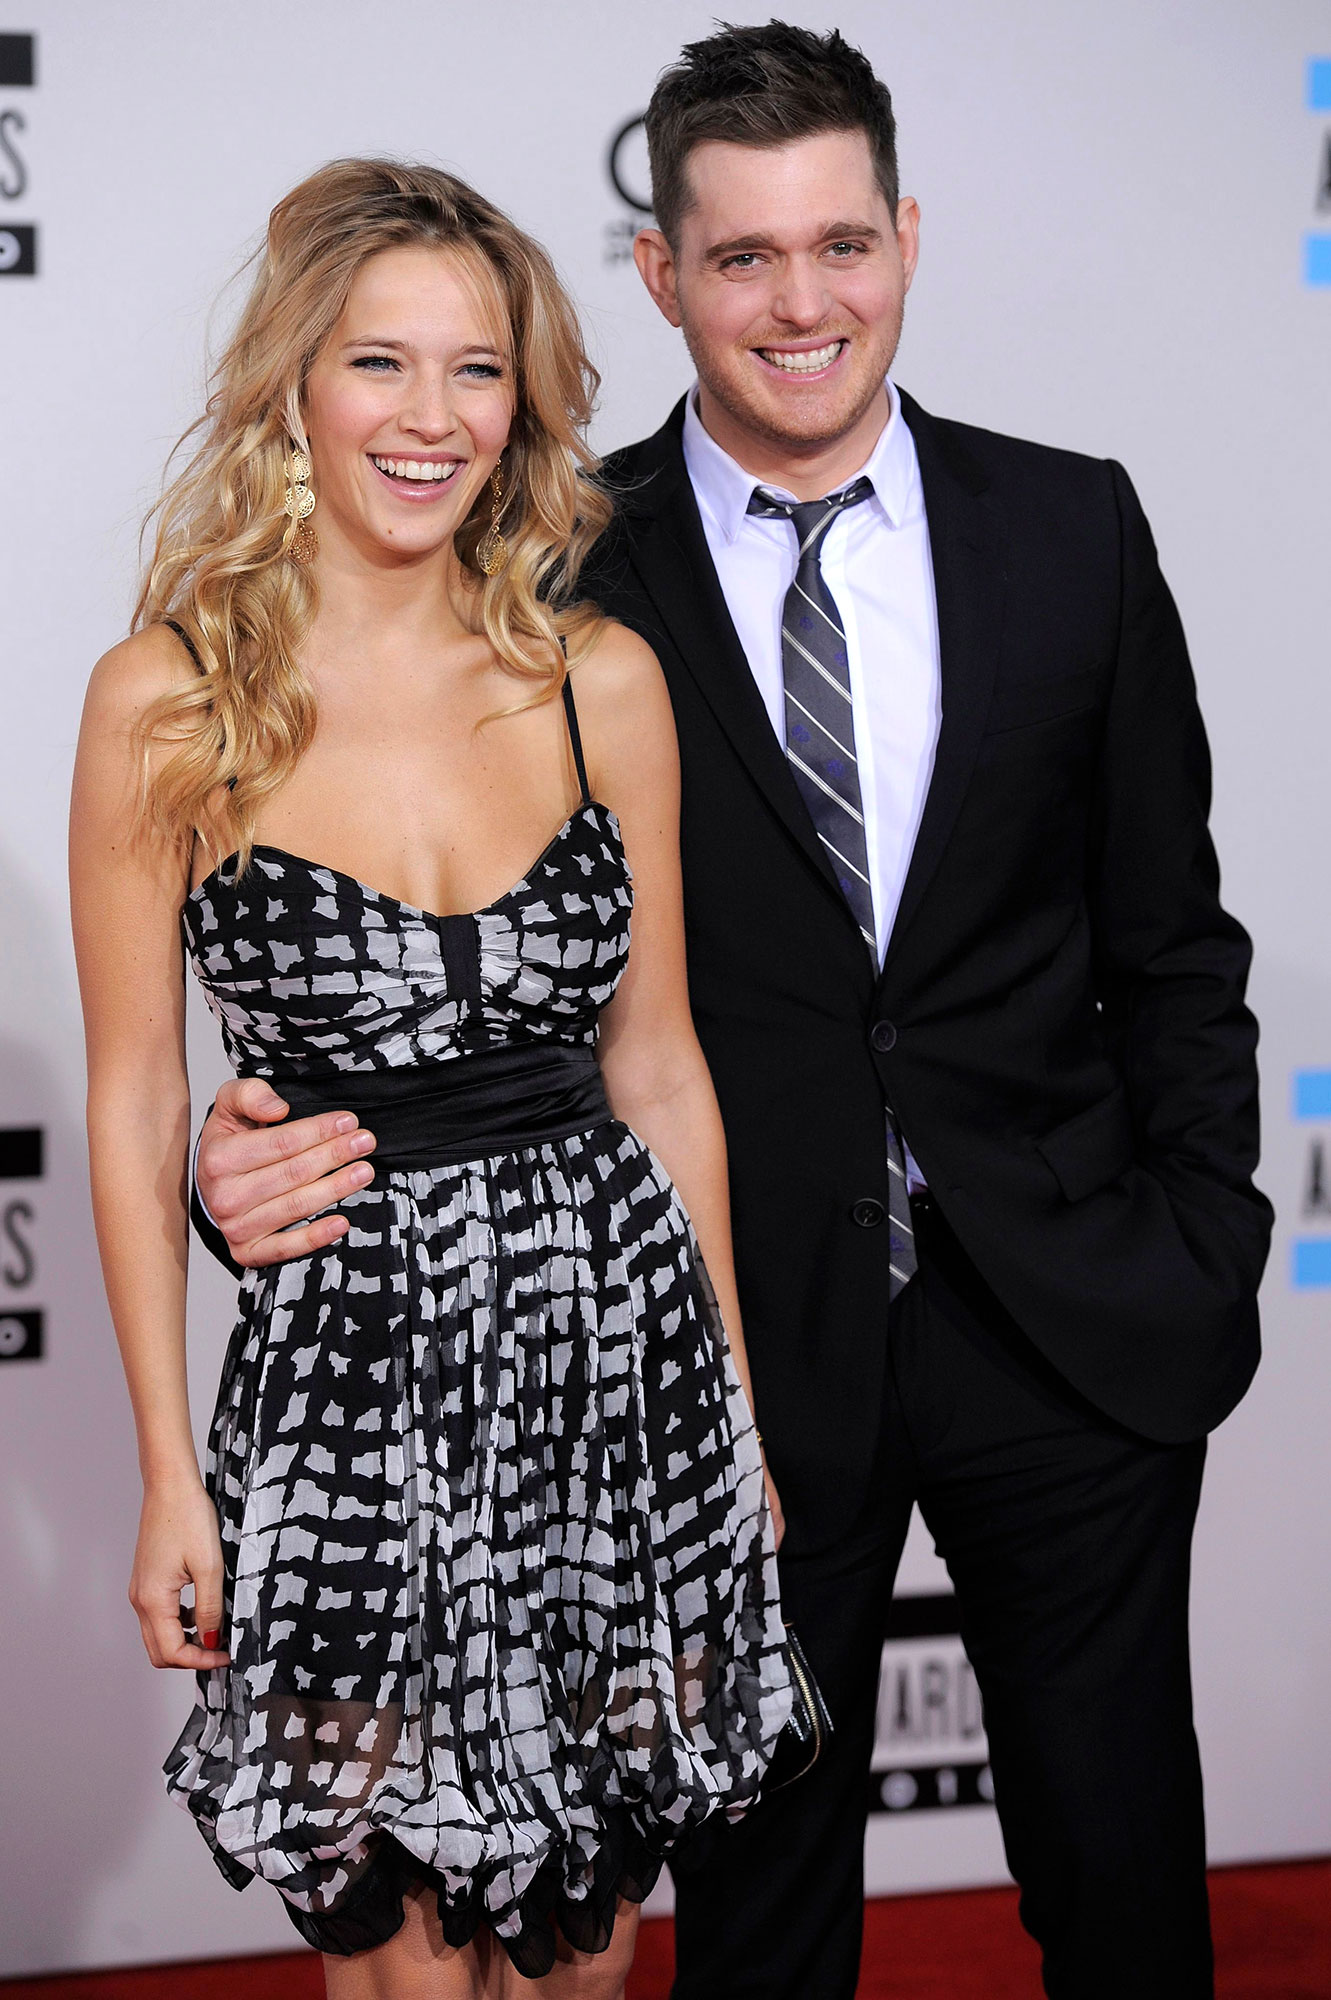 2009 Michael Buble and Wife Luisana Lopilato Timeline of Their Relationship